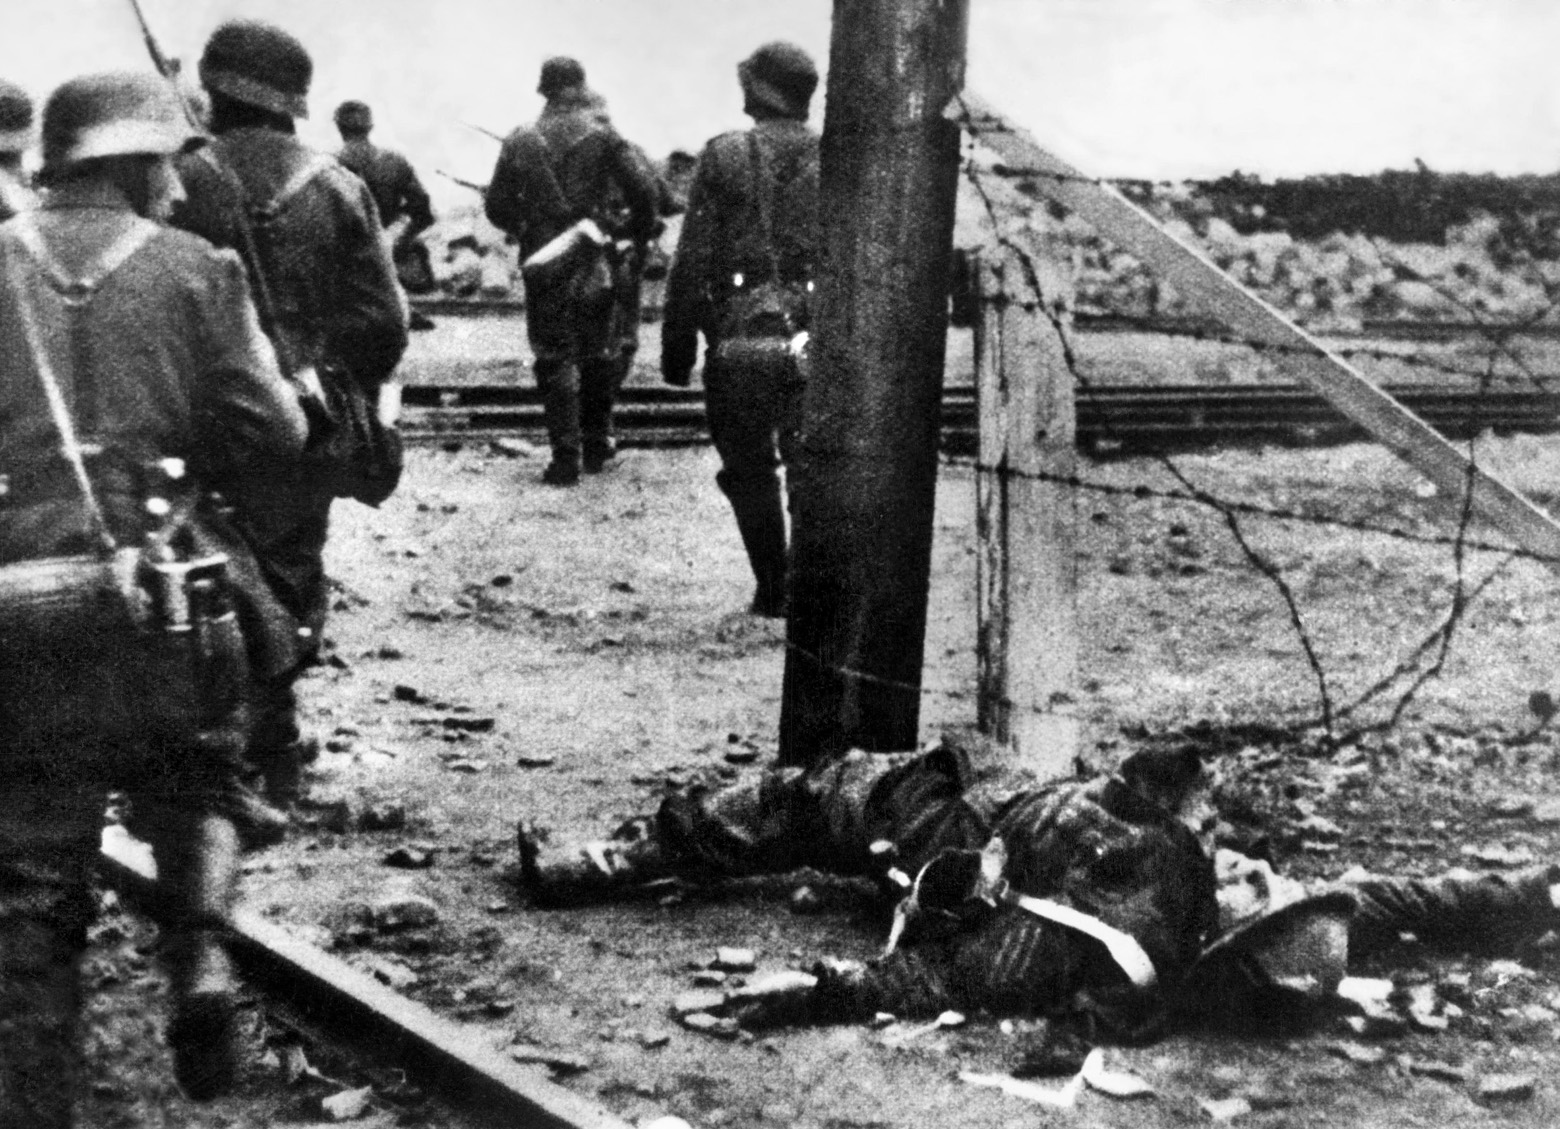 German soldiers looking for British commandos pass the lifeless body of one St. Nazaire raider who did not return home.